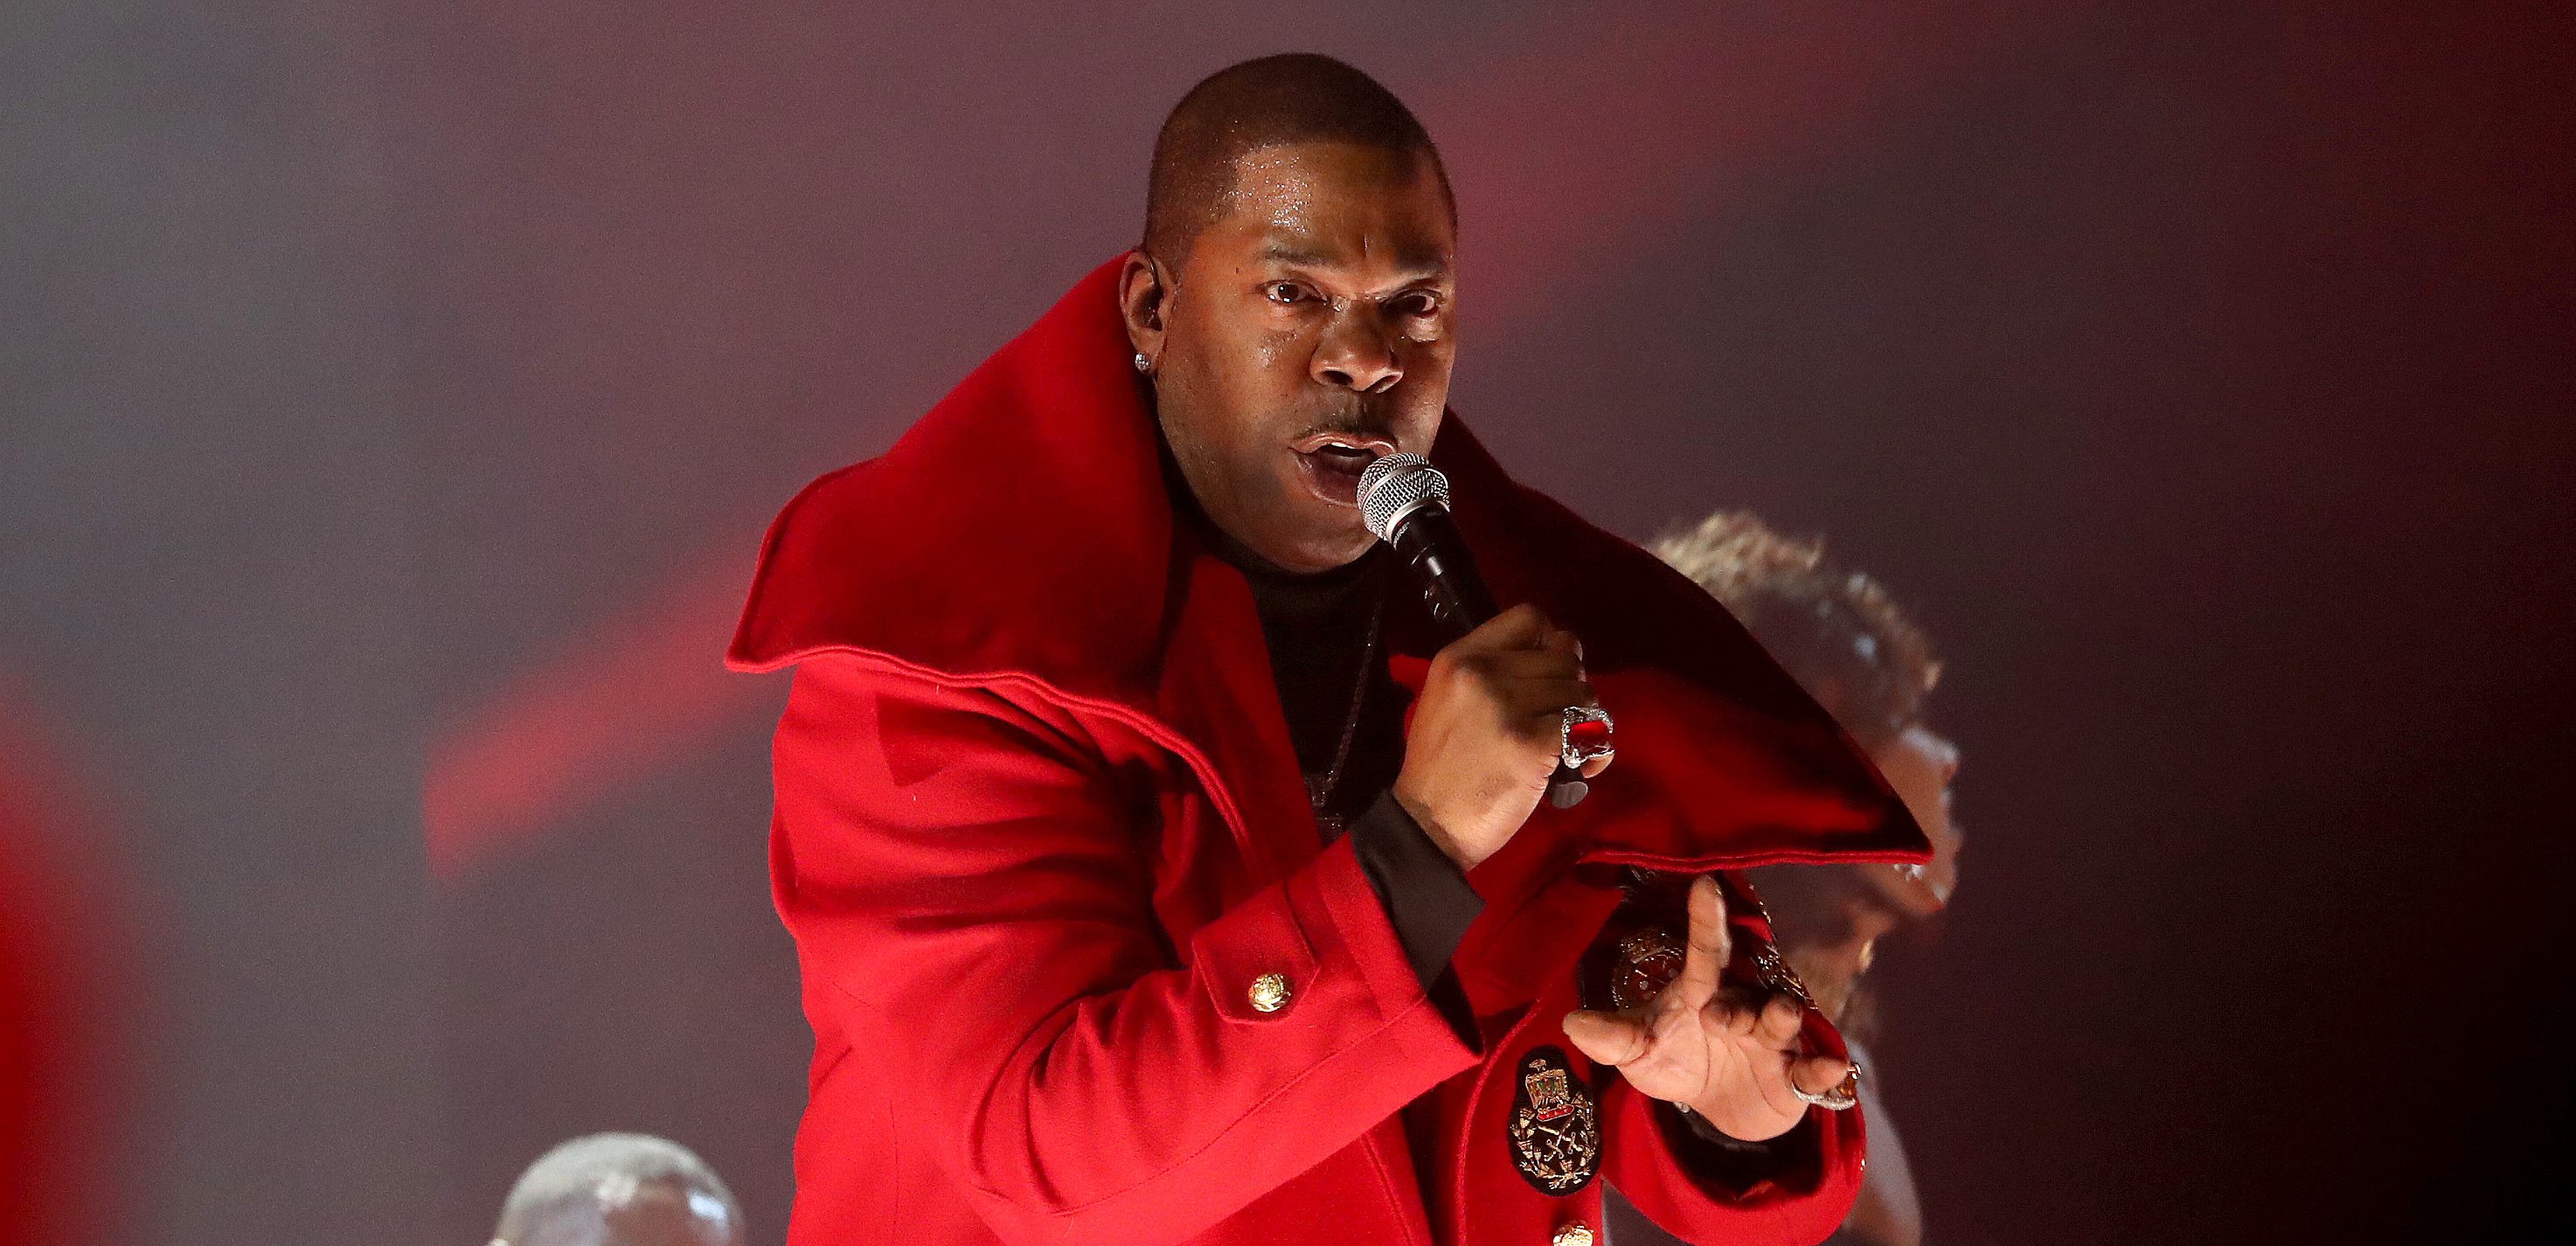 Busta Rhymes Blasts Rappers Performing With Backing Tracks